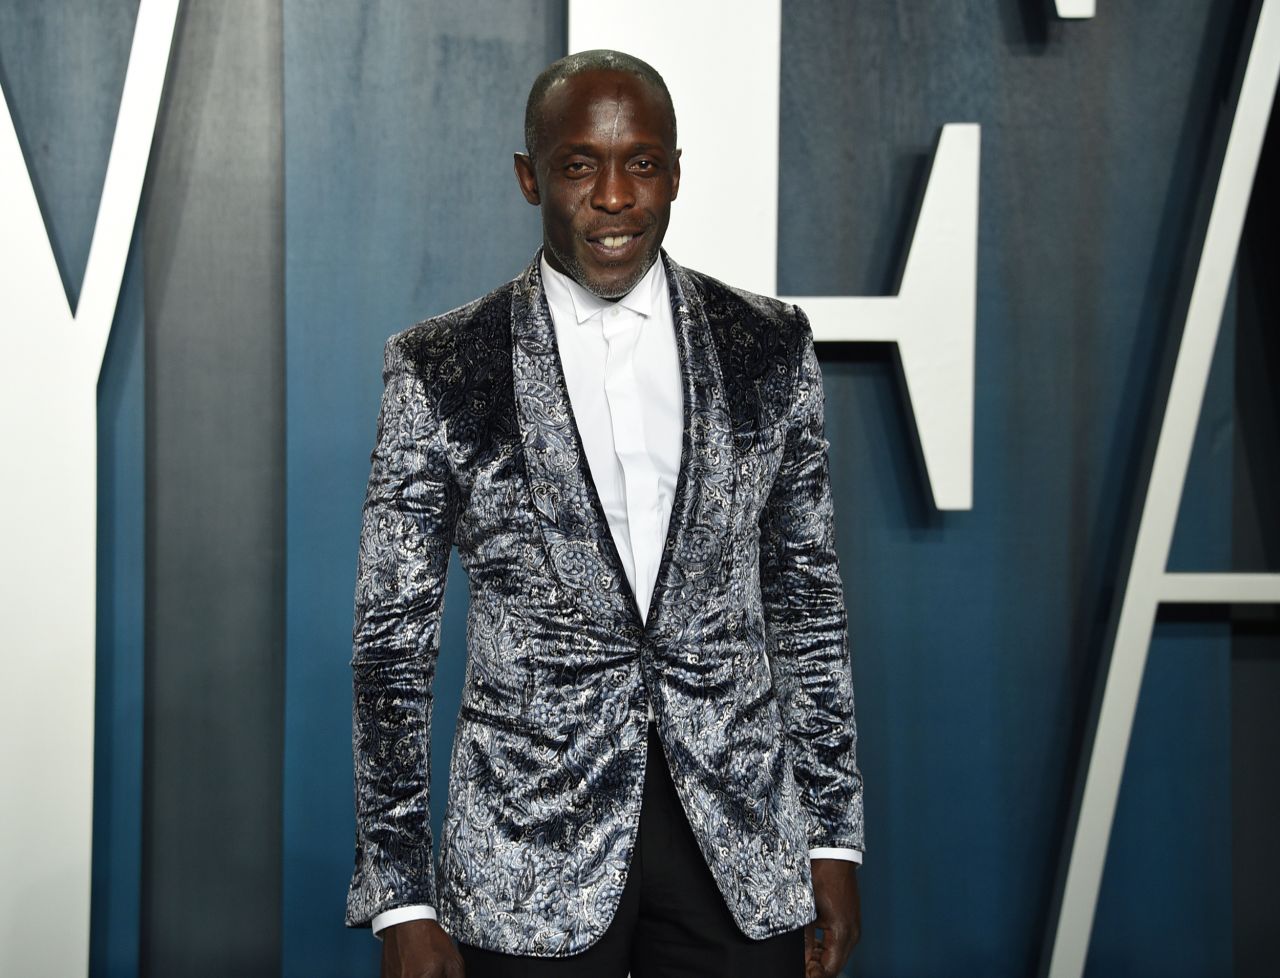 <a href="https://www.cnn.com/2021/09/06/entertainment/michael-k-williams/index.html" target="_blank">Michael K. Williams,</a> an actor best known for his role as Omar Little on HBO's "The Wire," was found dead in his New York apartment, a law enforcement official told CNN on September 6. He was 54. Williams amassed a number of accolades during his career, including five Emmy nominations. 